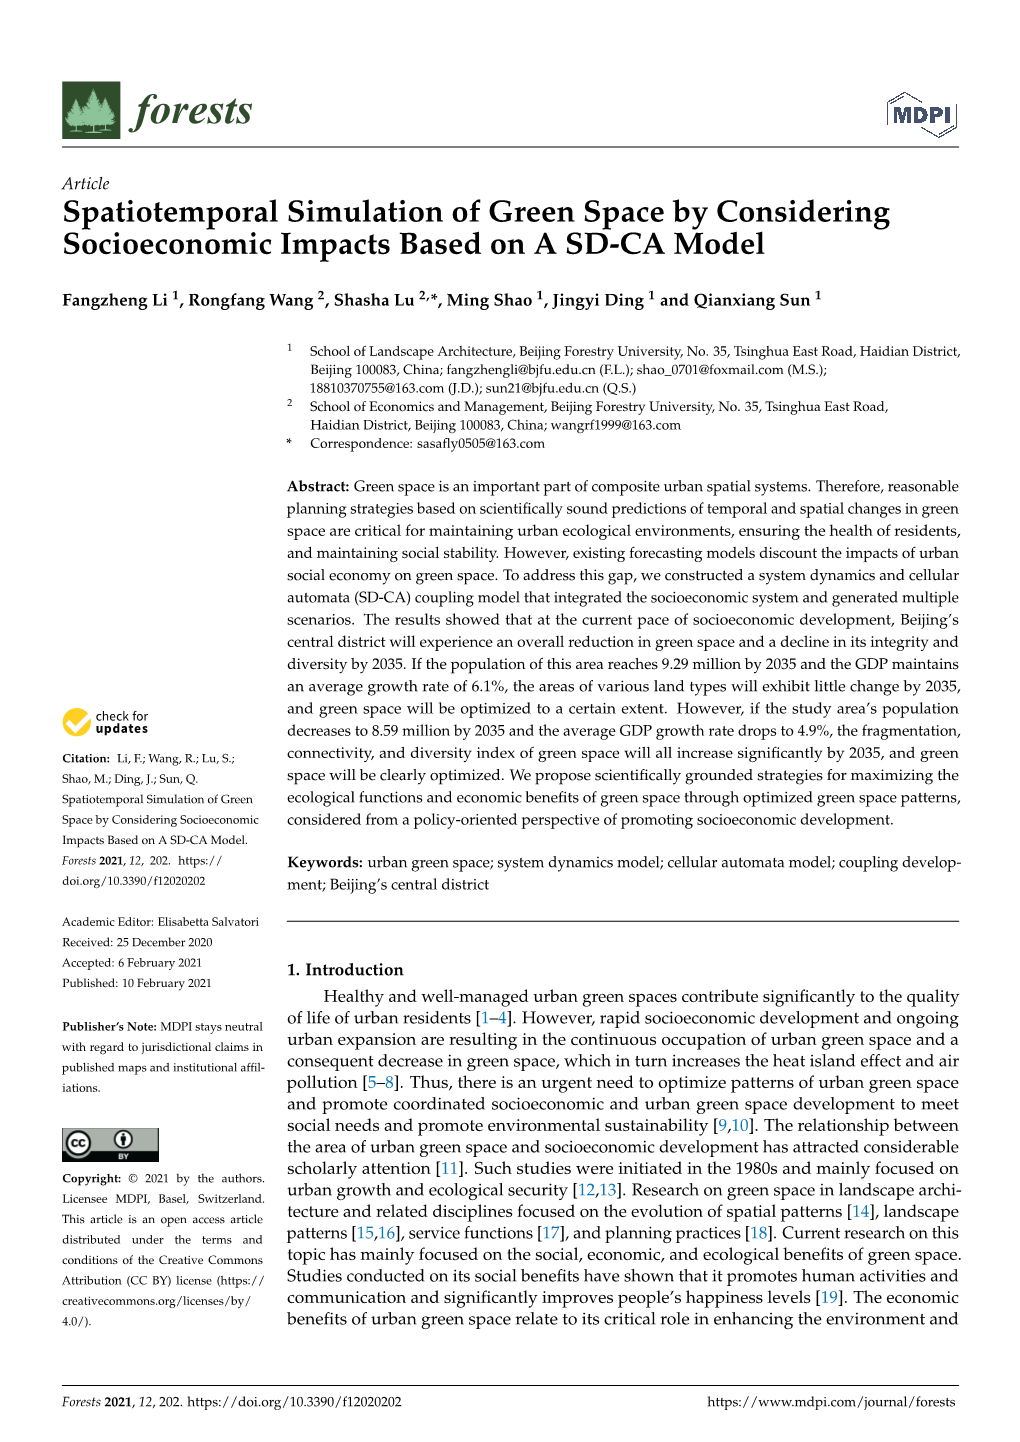 Spatiotemporal Simulation of Green Space by Considering Socioeconomic Impacts Based on a SD-CA Model